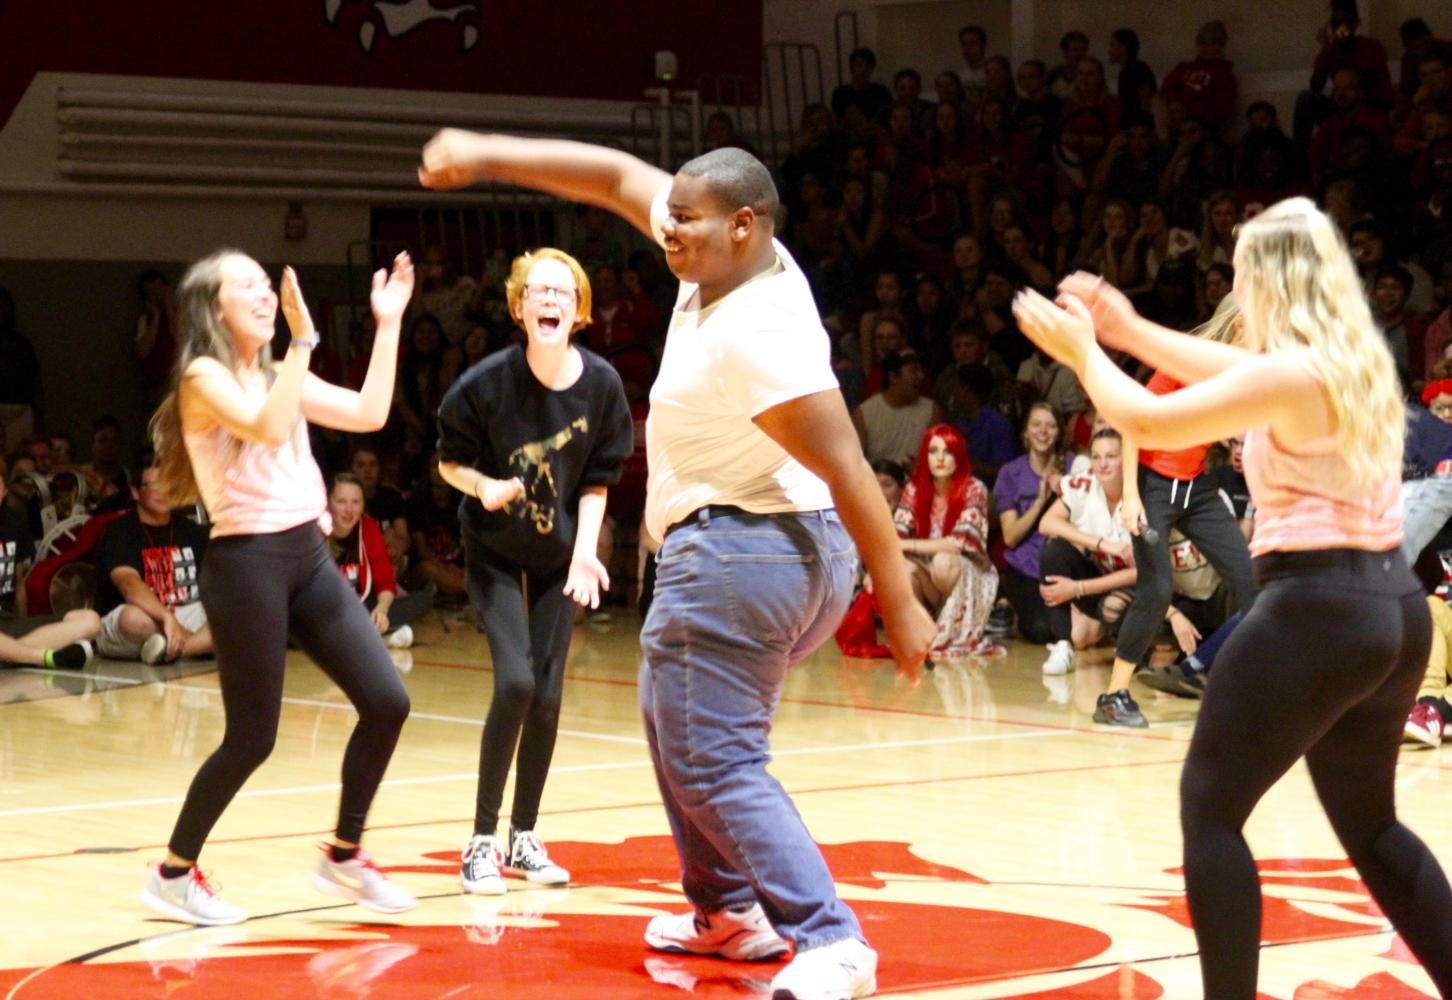 Bob Busts a Move to Win Pep Rally Dance Competition